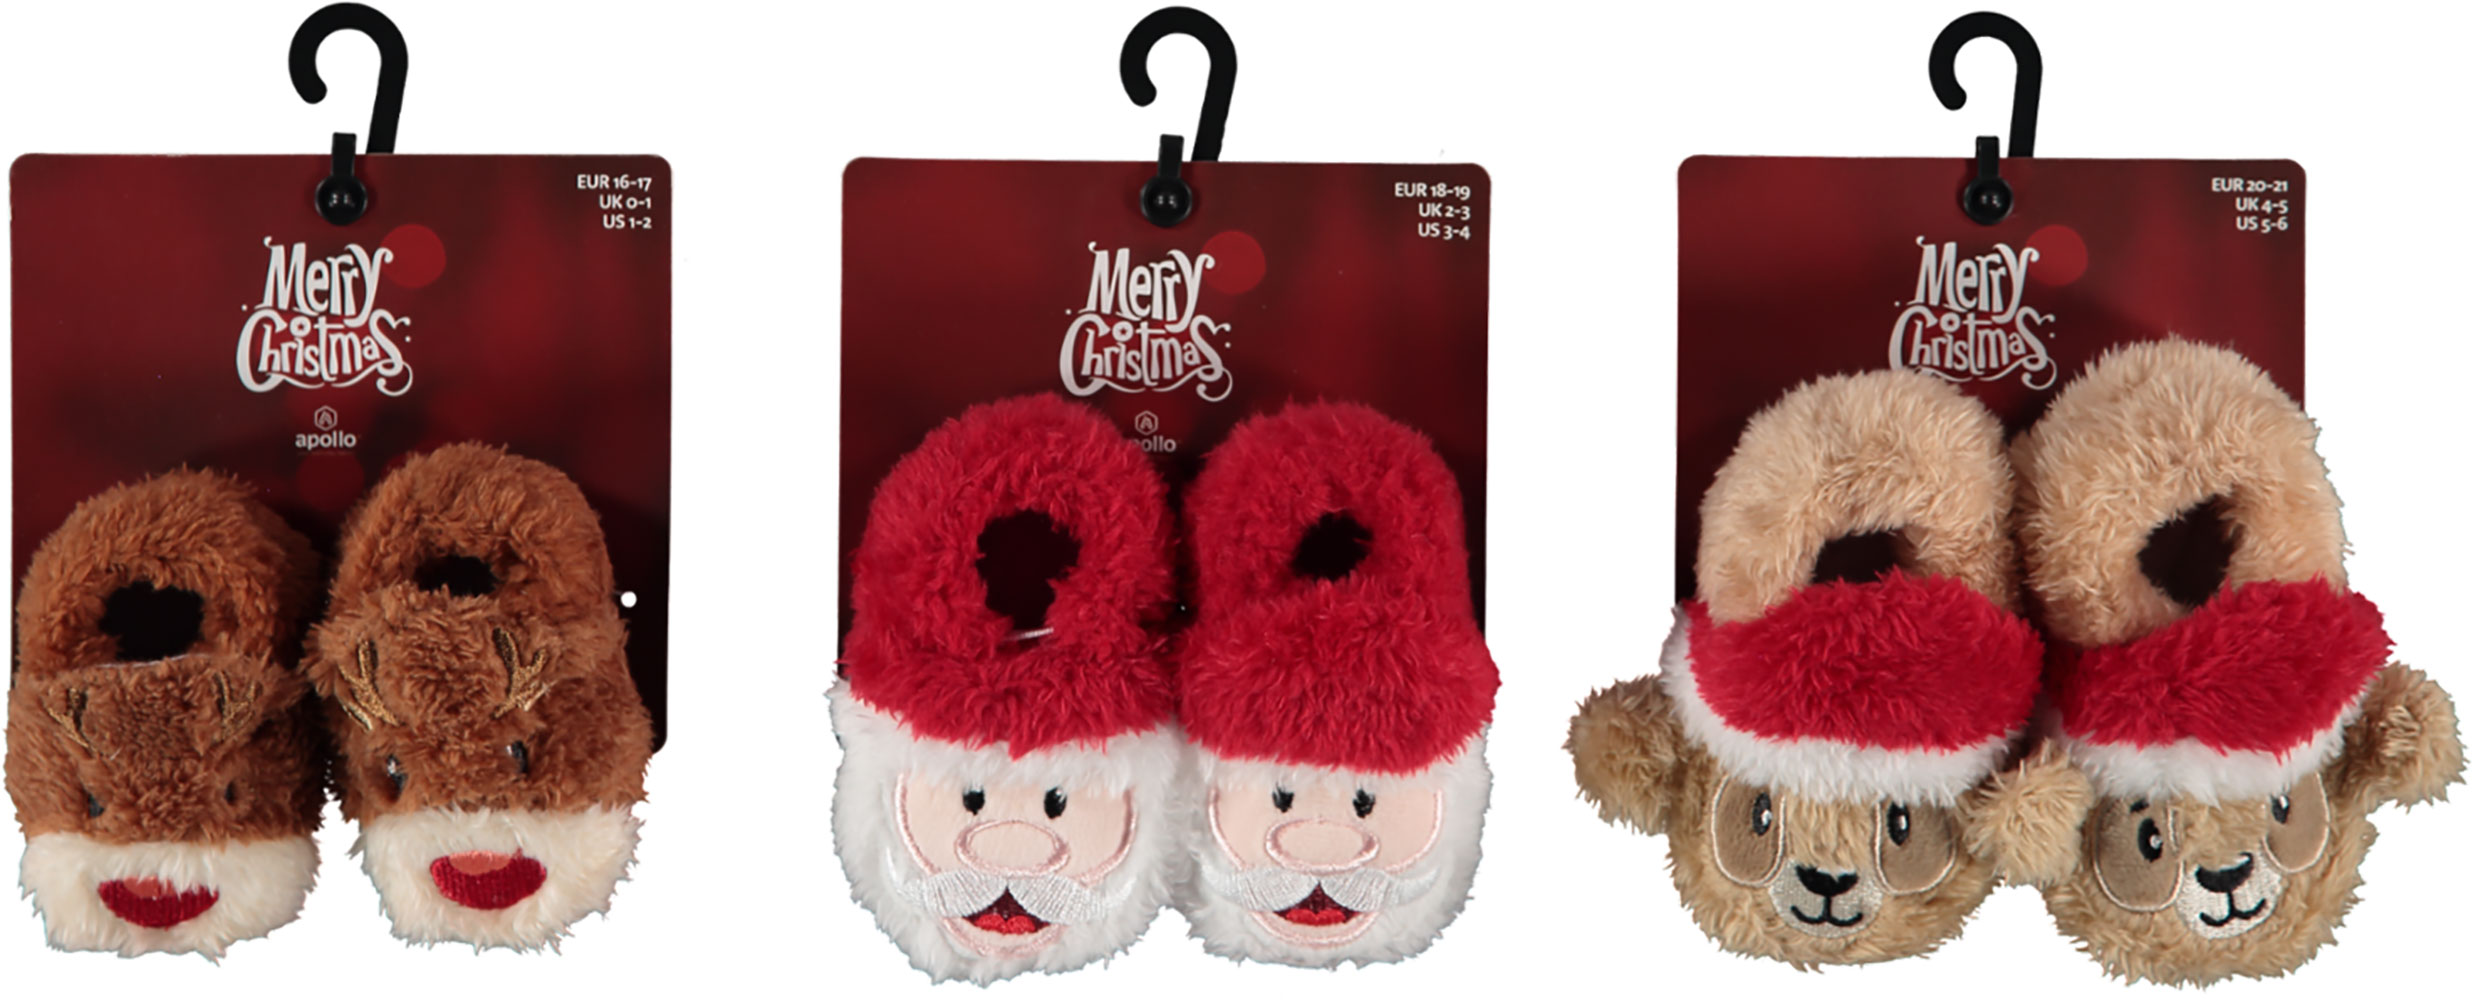 Baby Christmas Slippers.